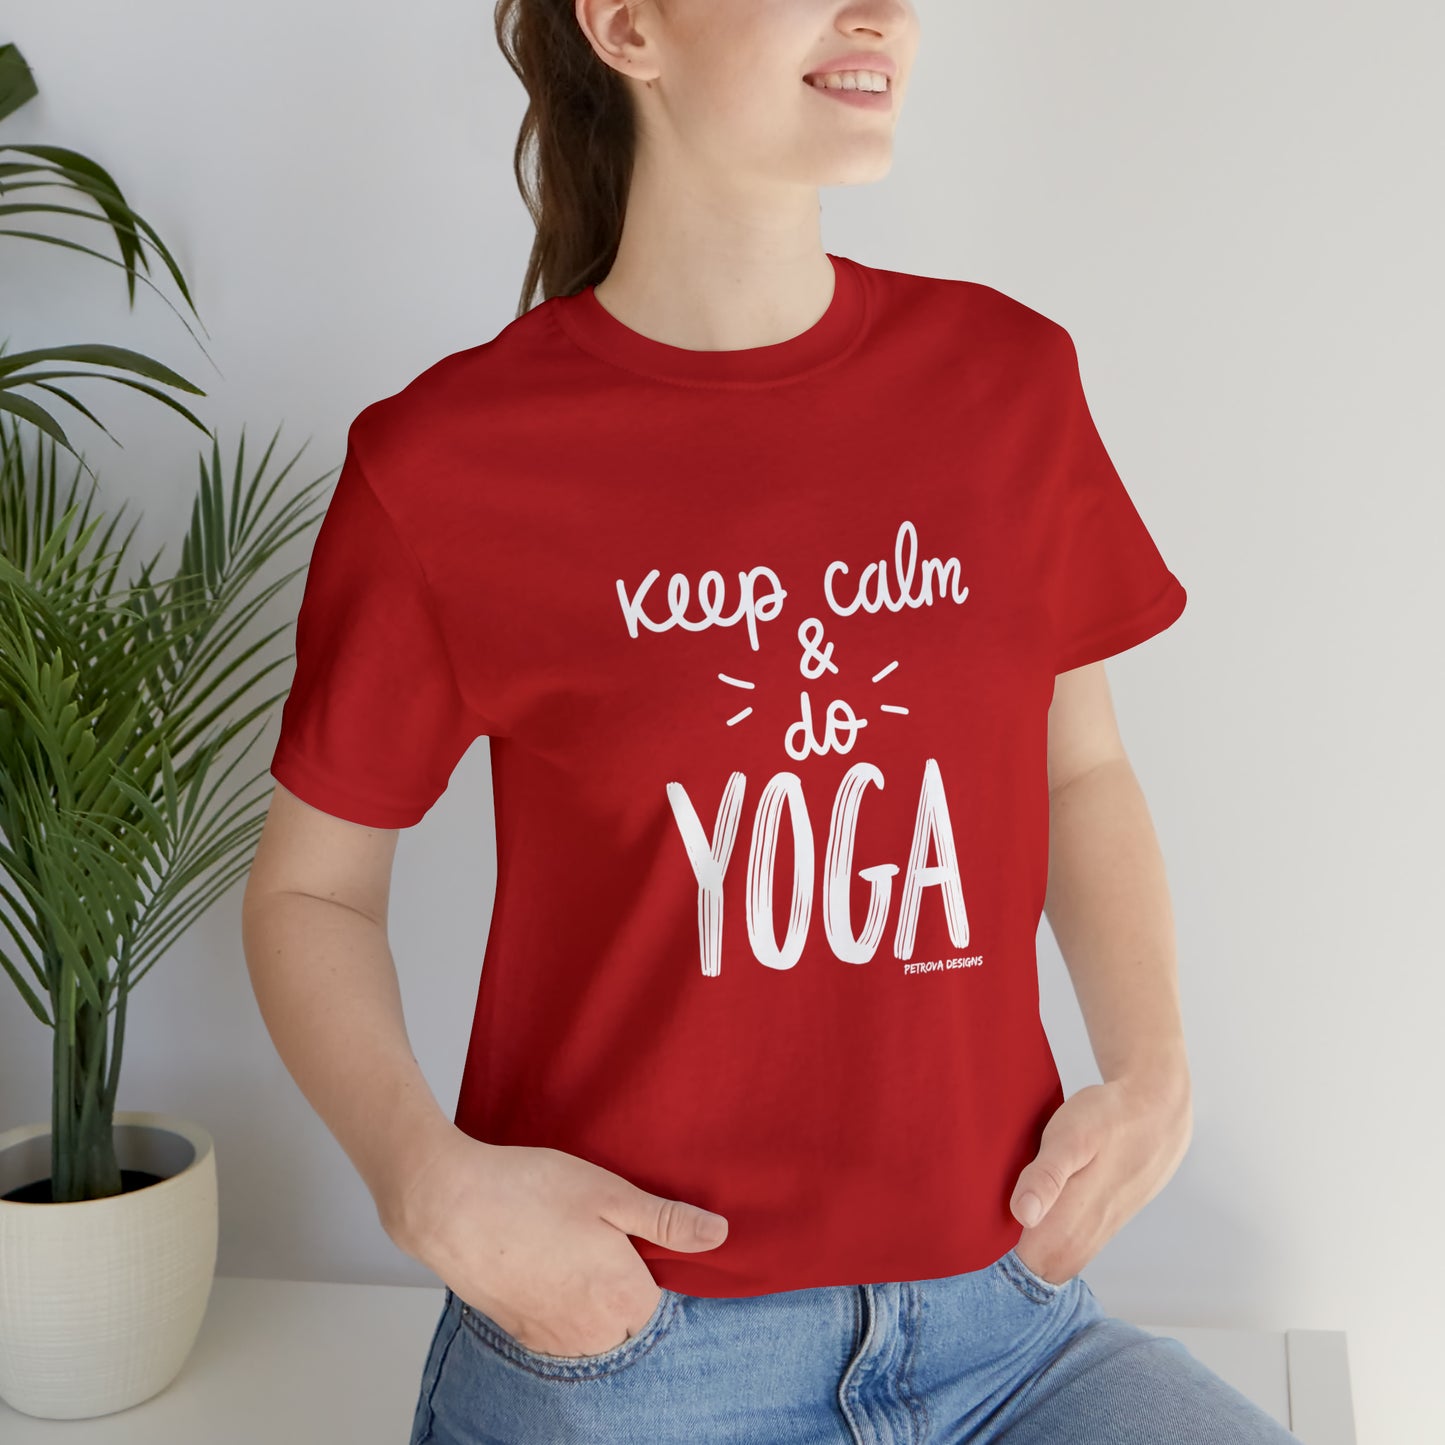 Red T-Shirt Tshirt Design Gift for Friend and Family Short Sleeved Shirt Yoga Petrova Designs